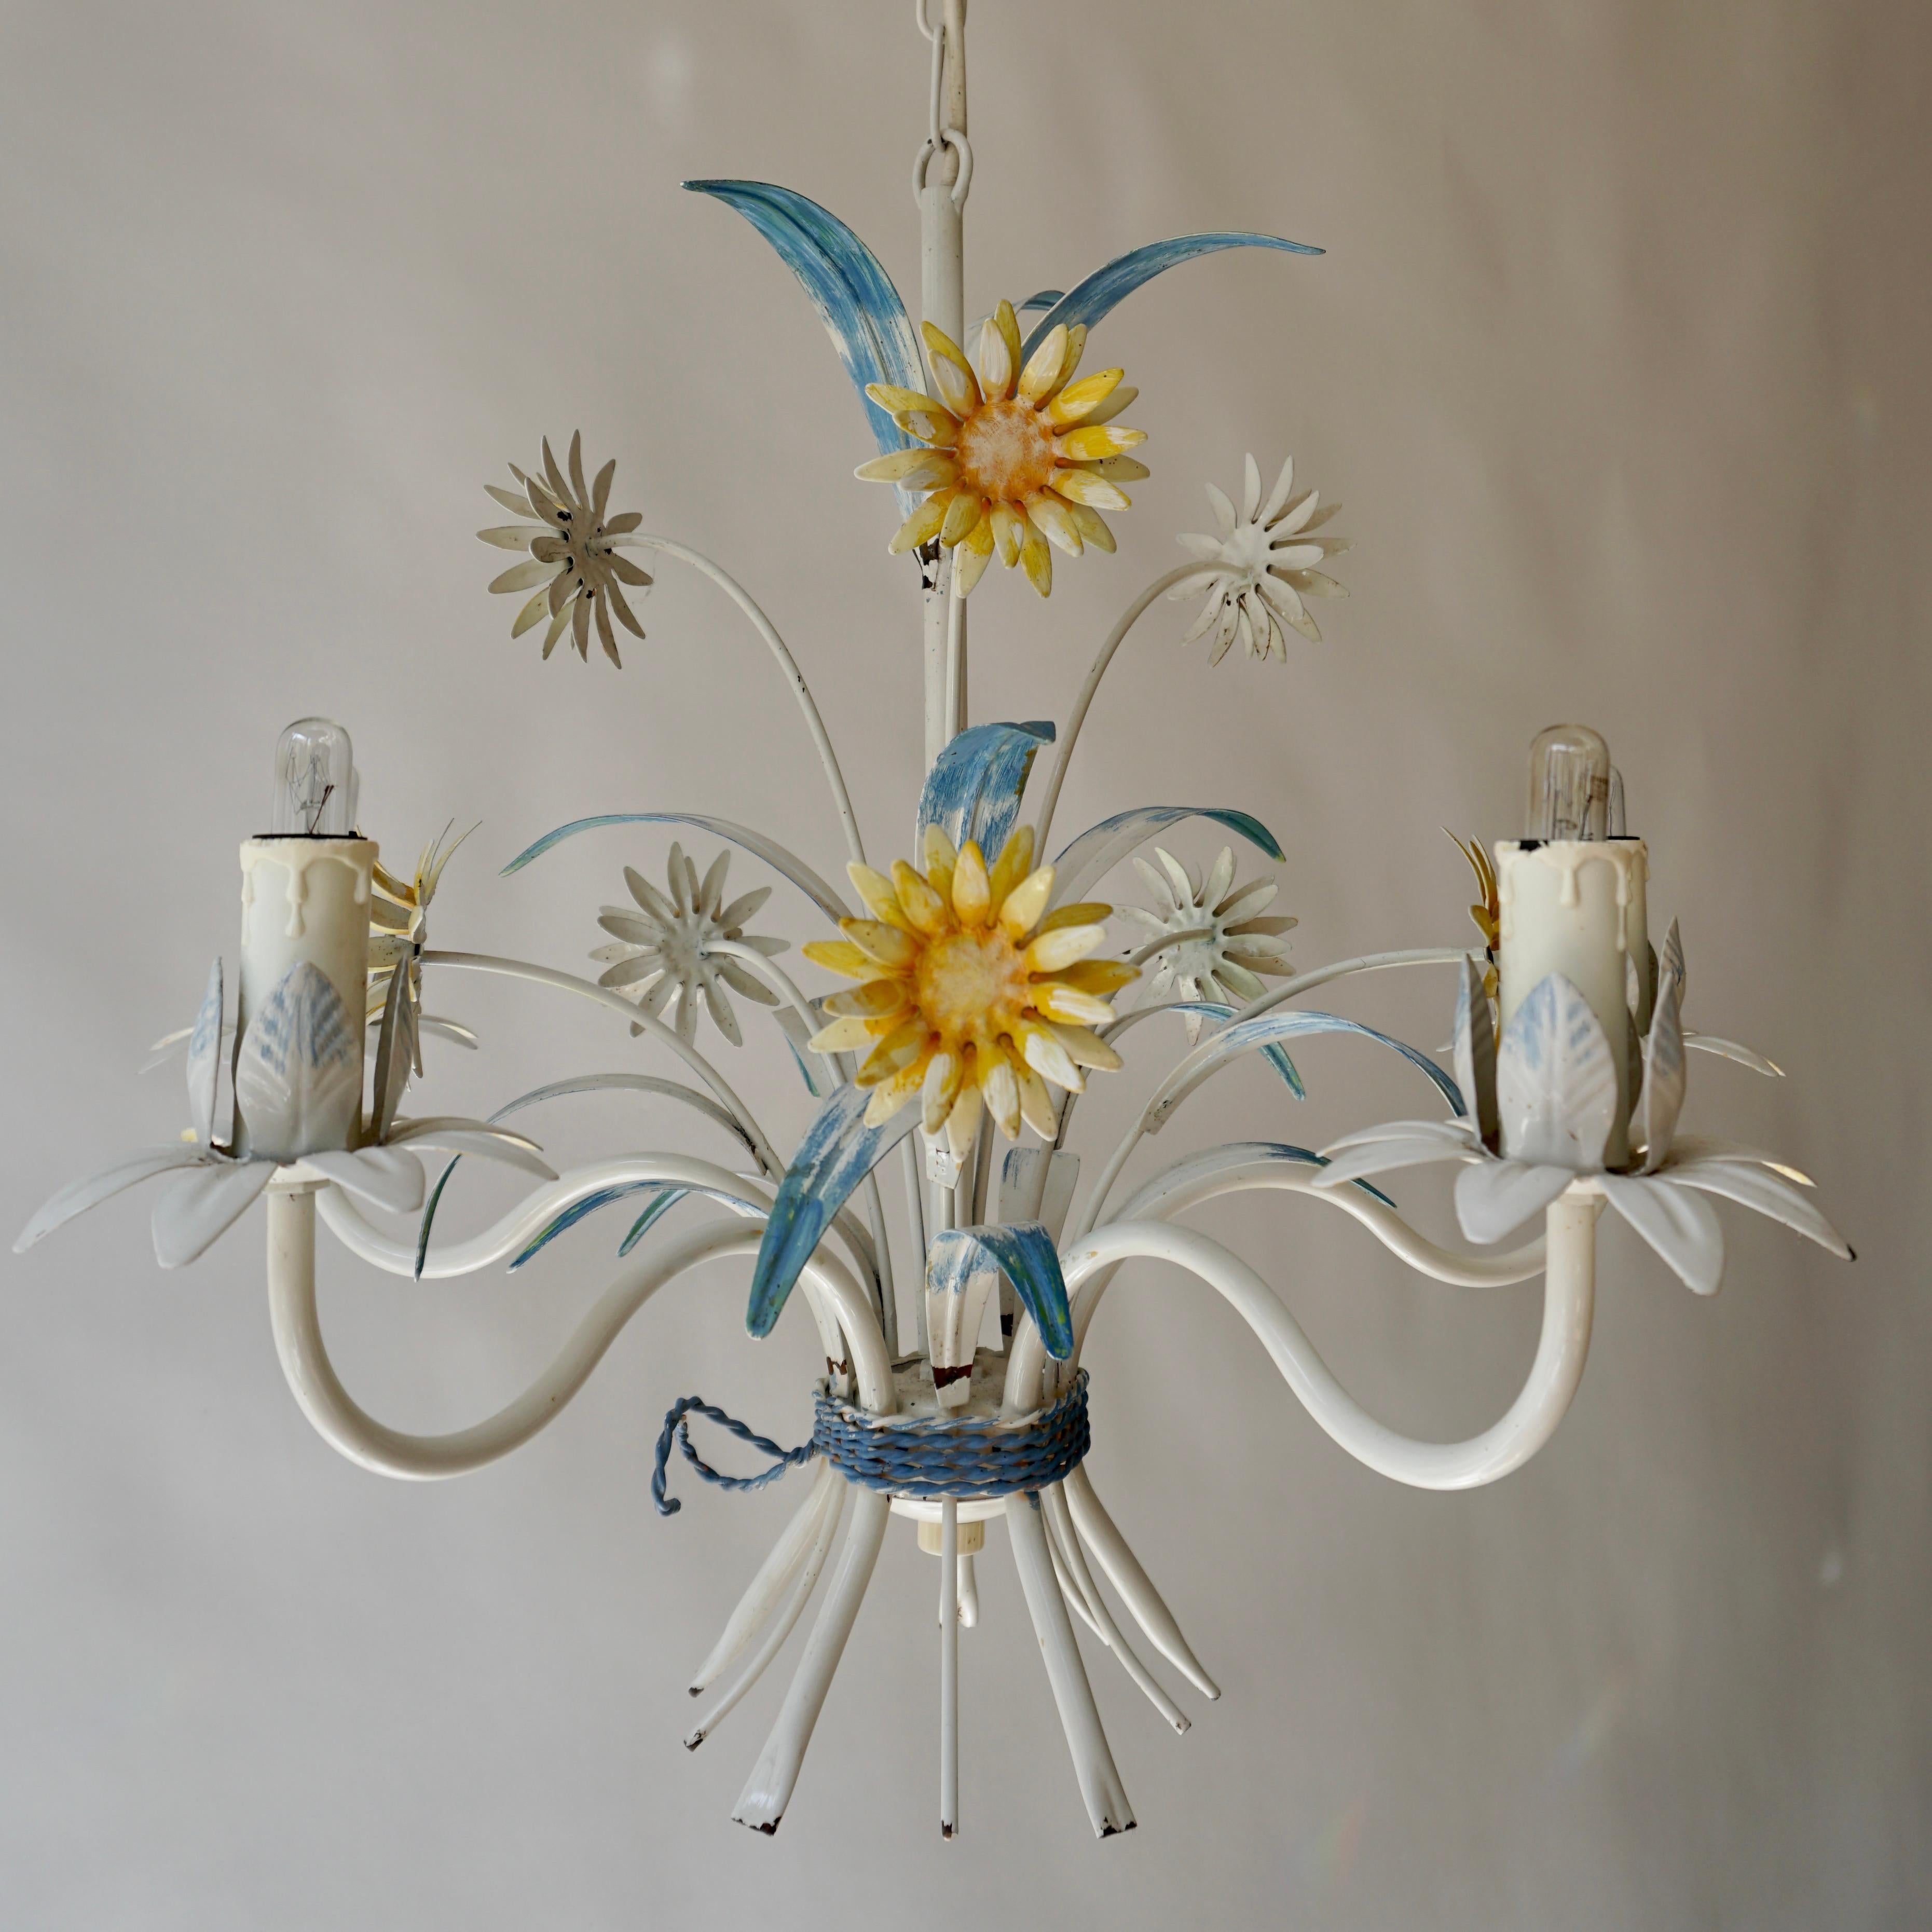 20th Century Mid-Century Painted Tôle 5-Arm Light Fixture with Yellow Flowers For Sale